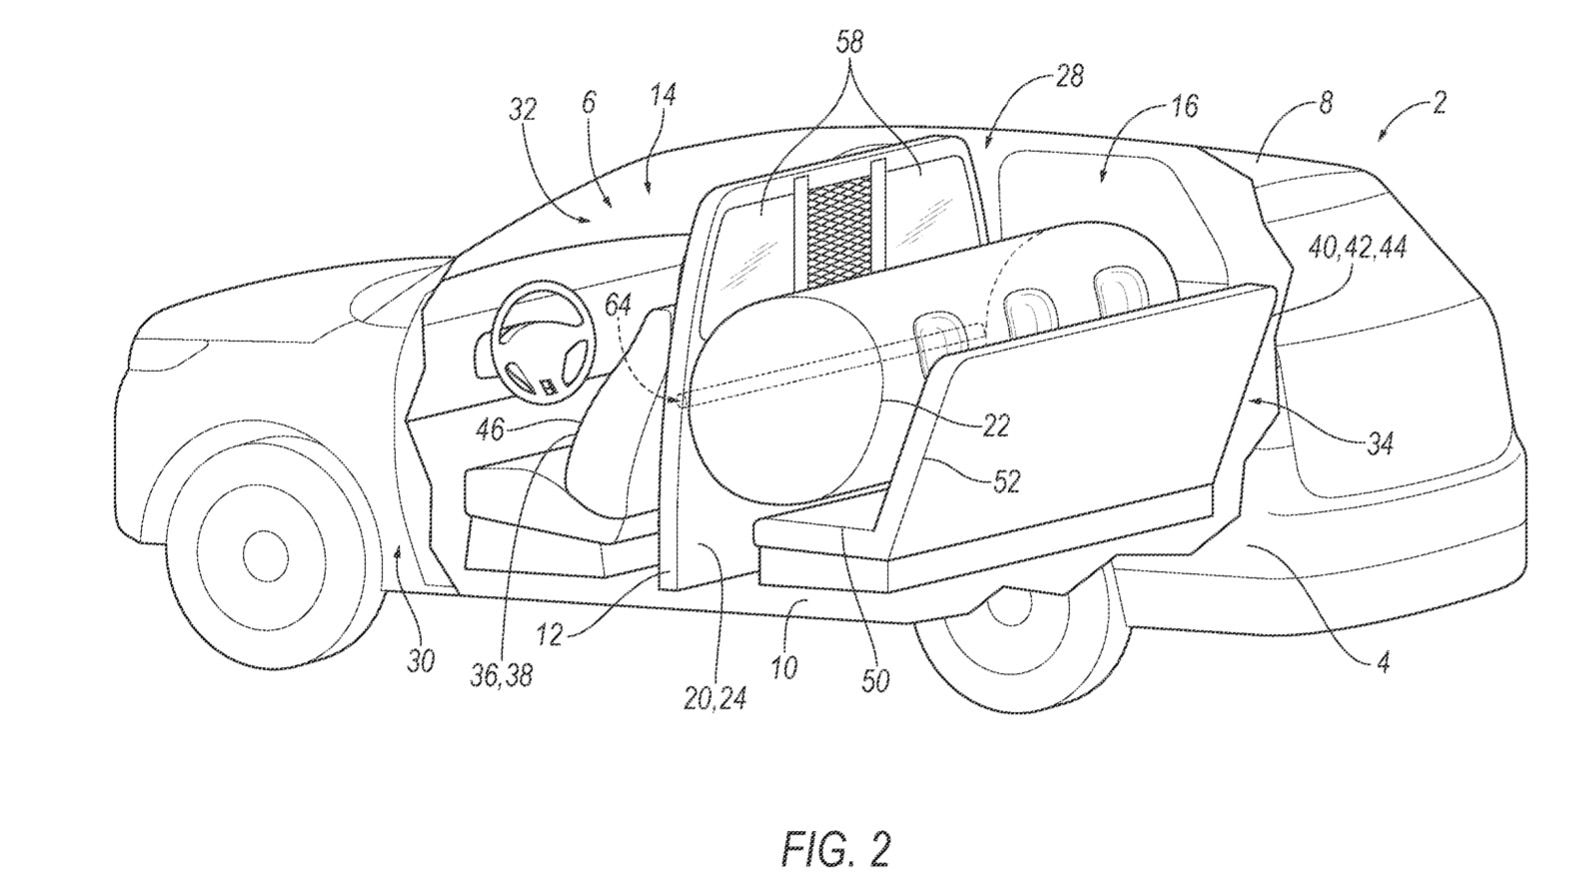 Ford police car airbag patent image